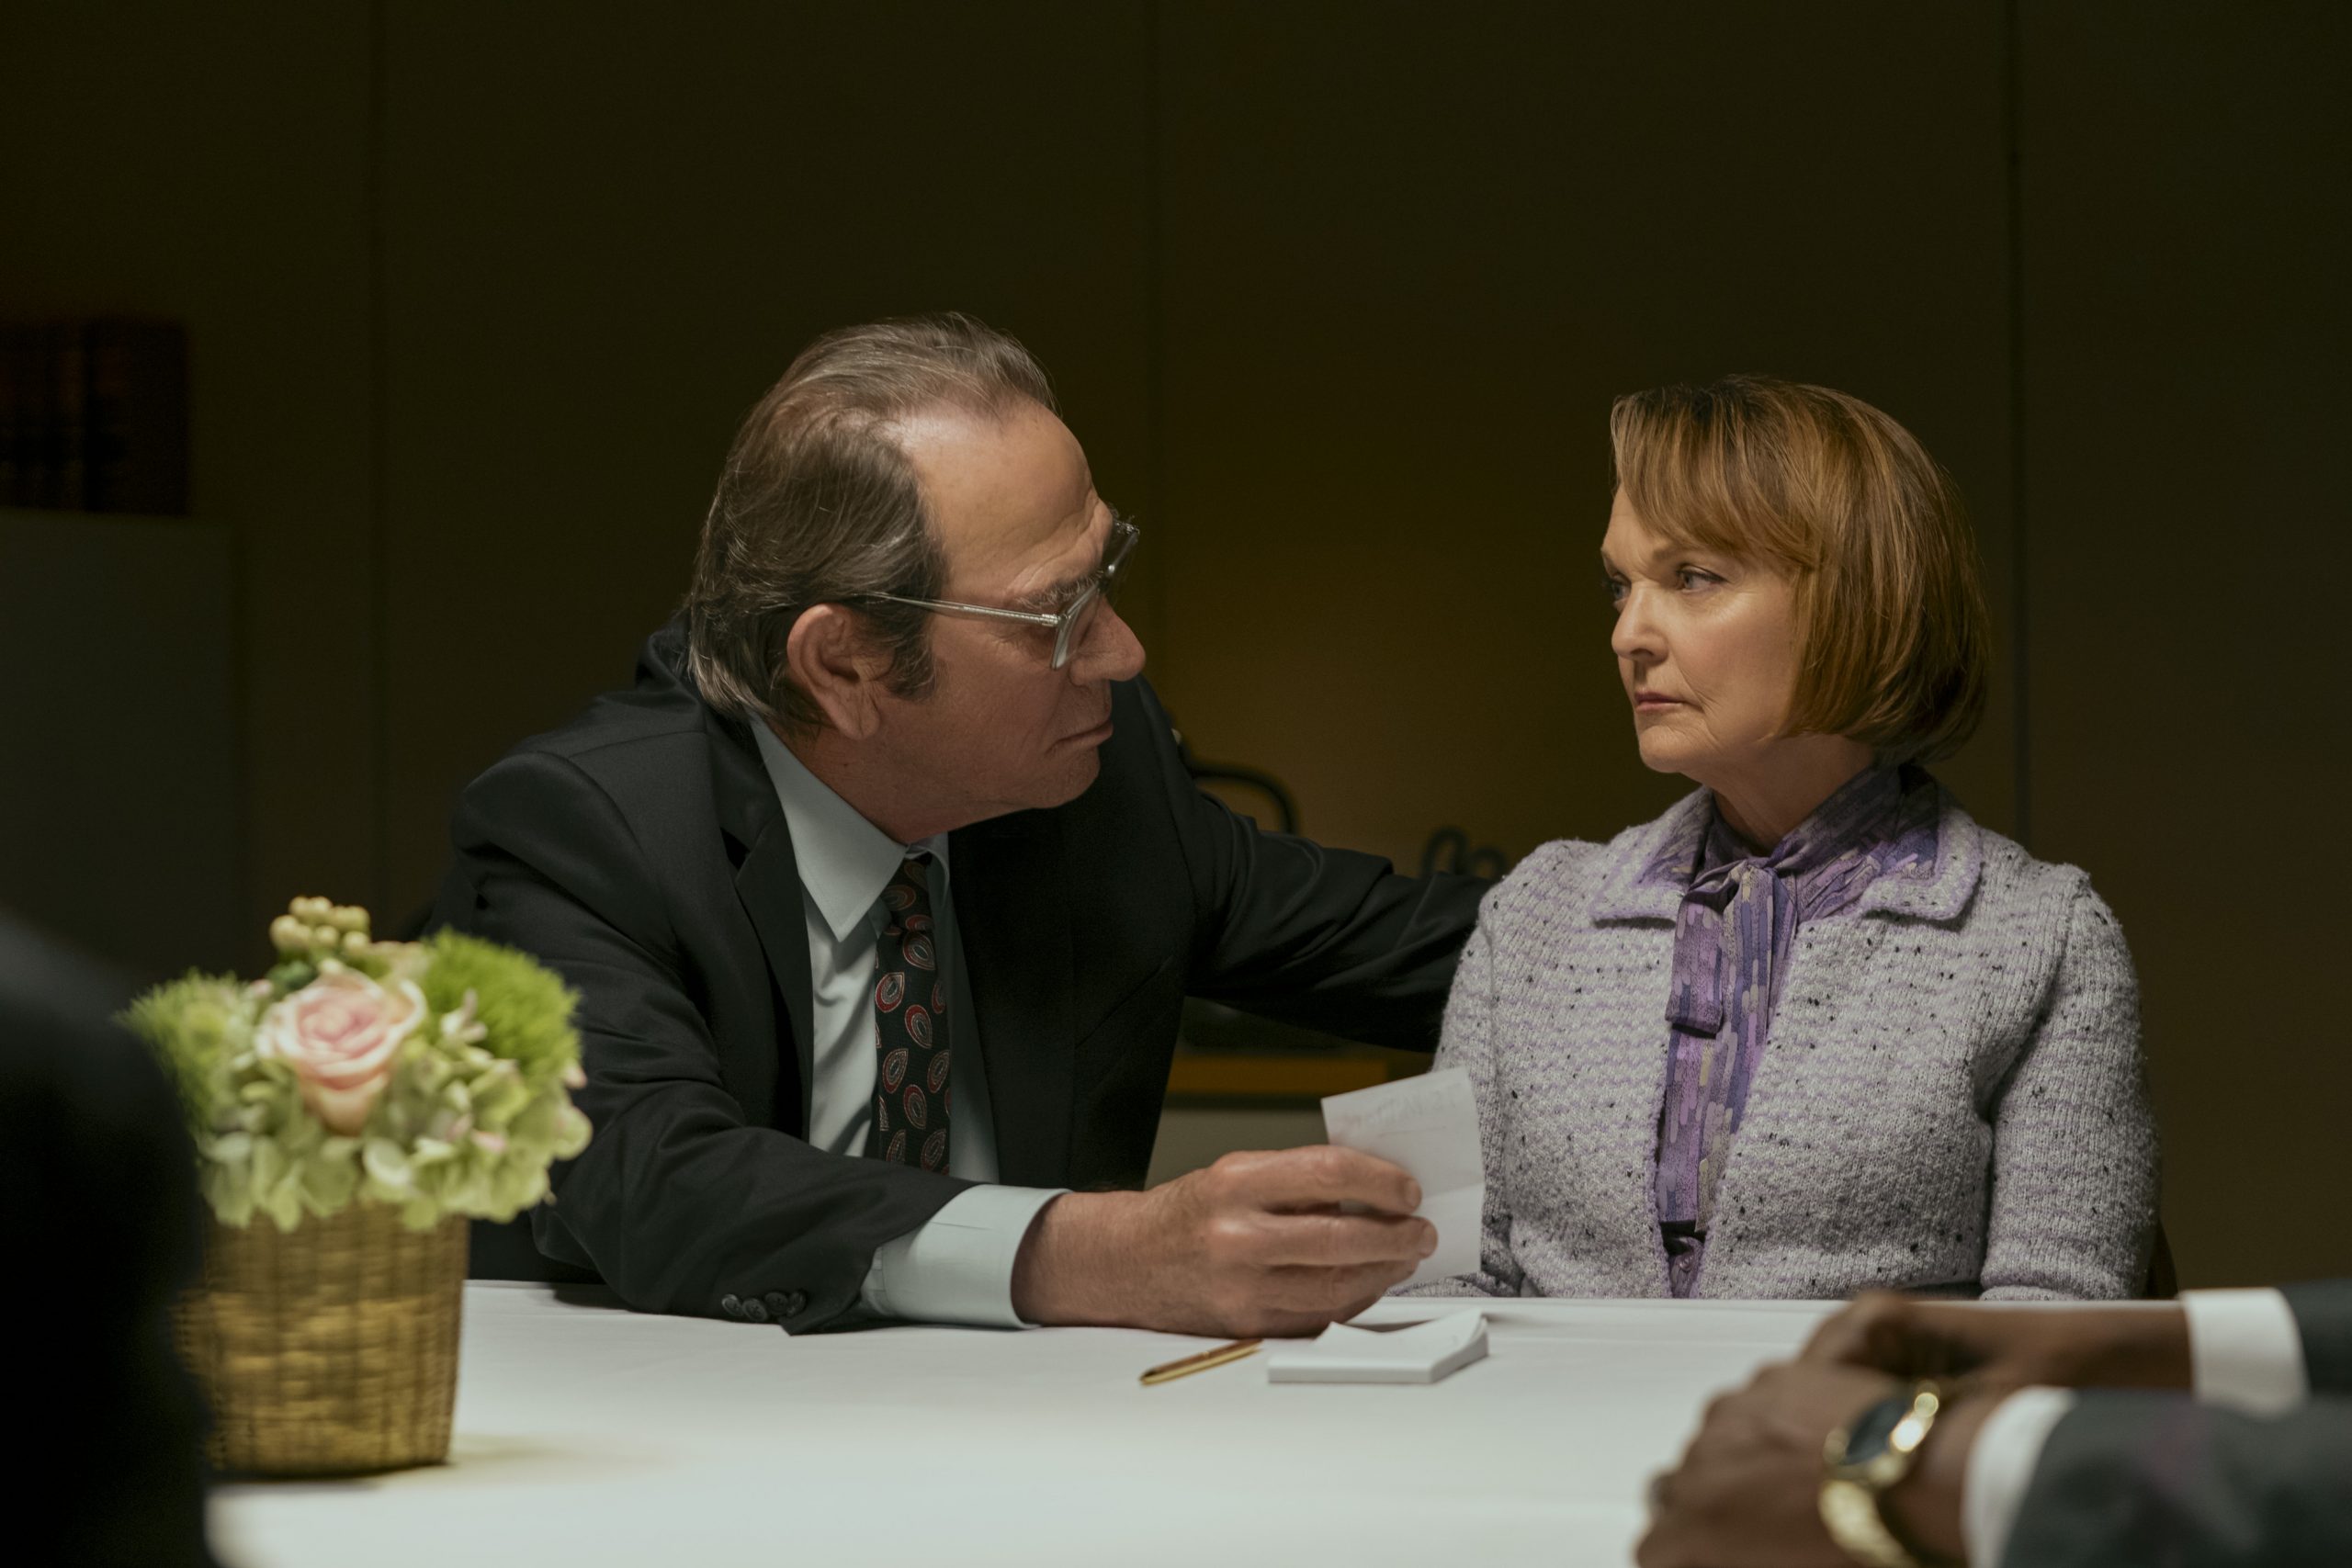 Tommy Lee Jones as Jeremiah O'Keefe and Pamela Reed as Annette O'Keefe in The Burial Photo: Skip Bolen © AMAZON CONTENT SERVICES LLC